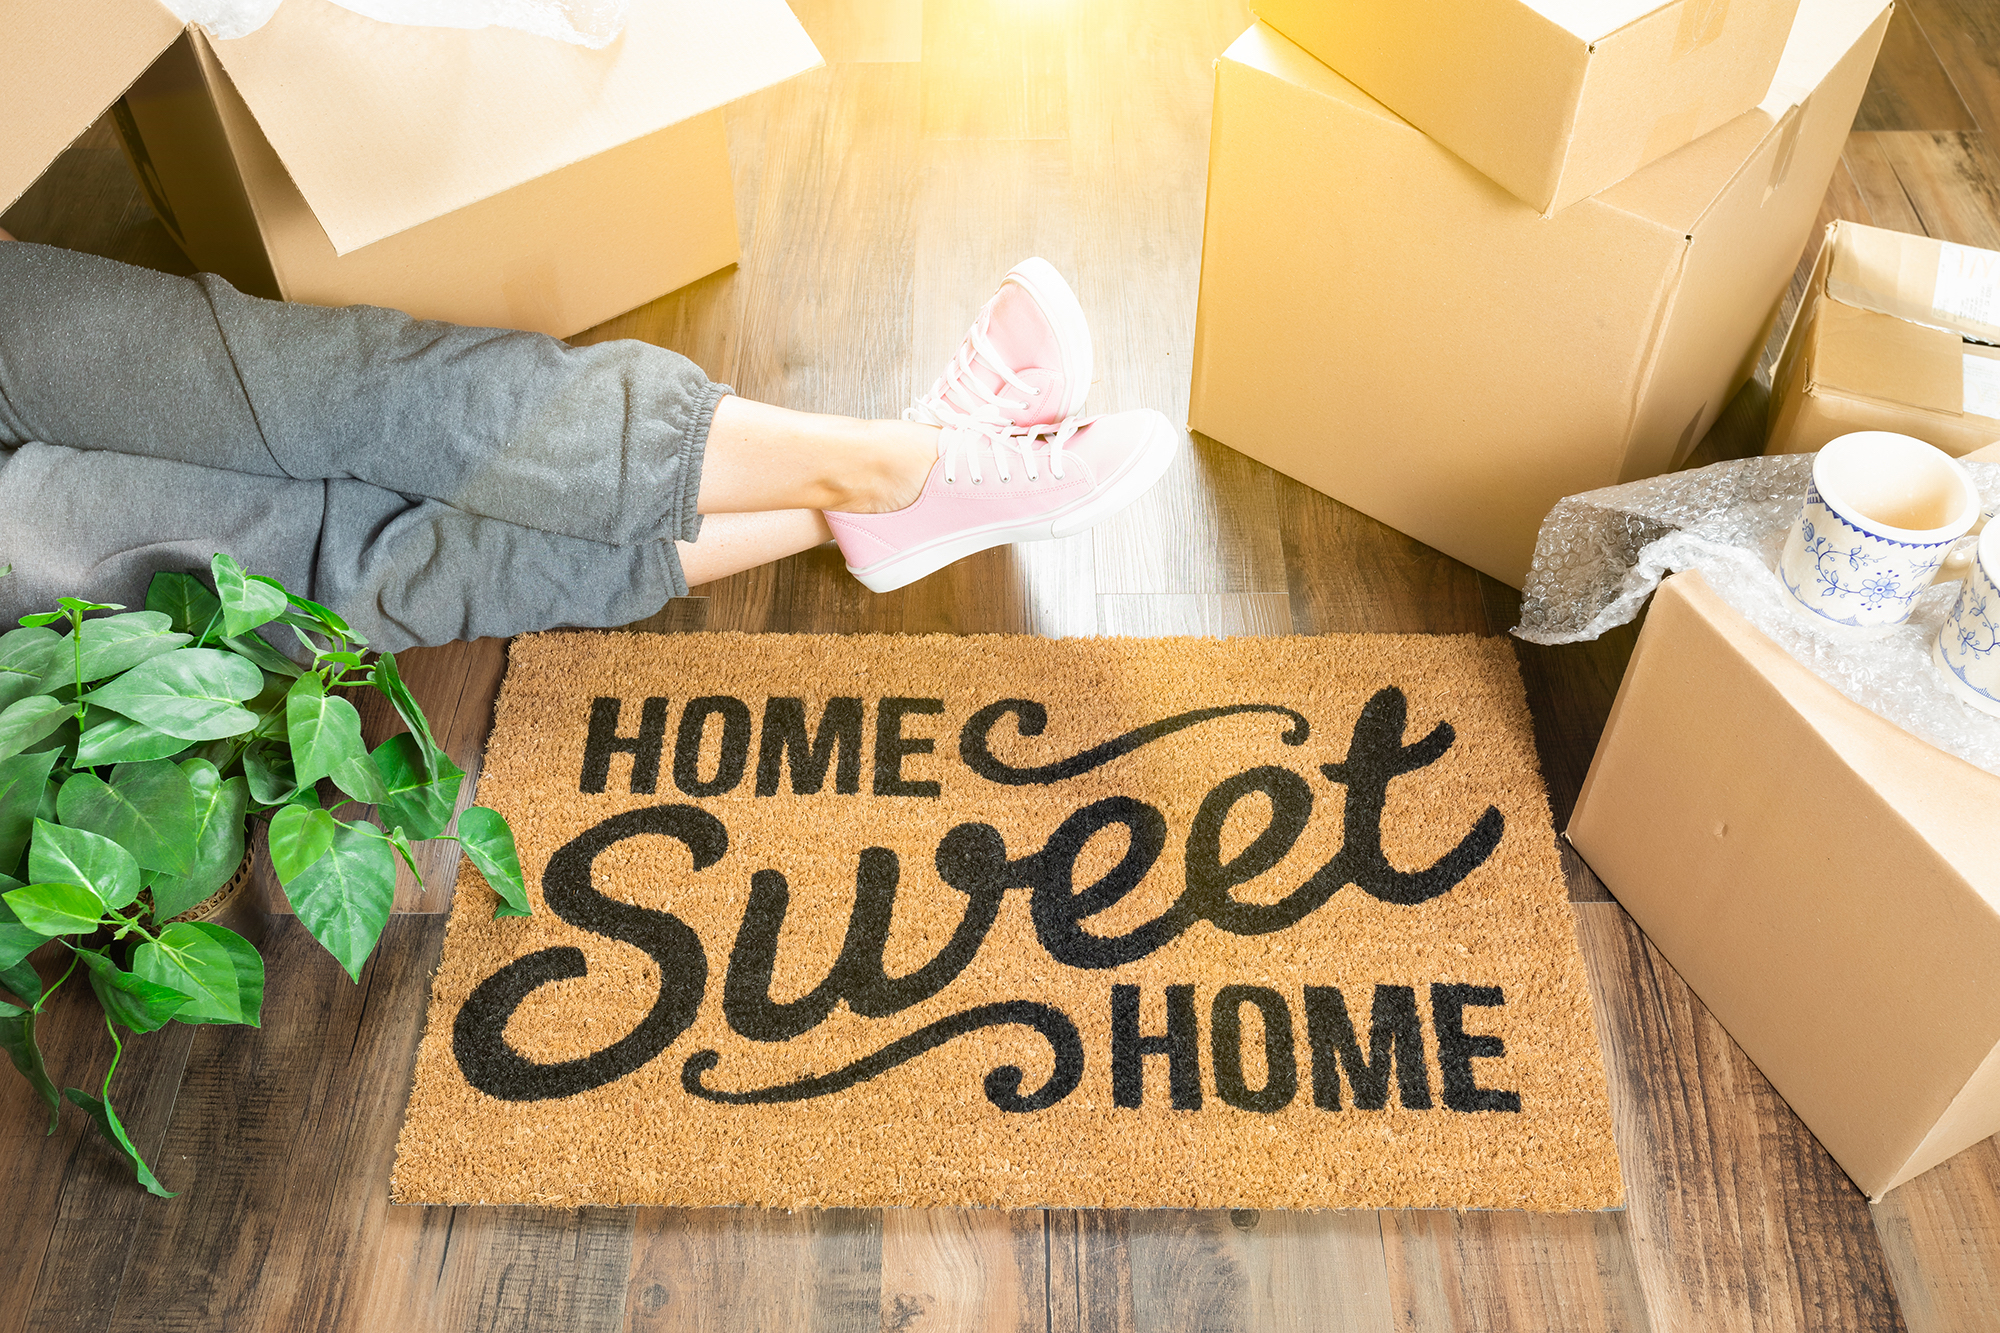 Welcome mat that says "home sweet home", showing a person relaxing among moving boxes and making themselves at home